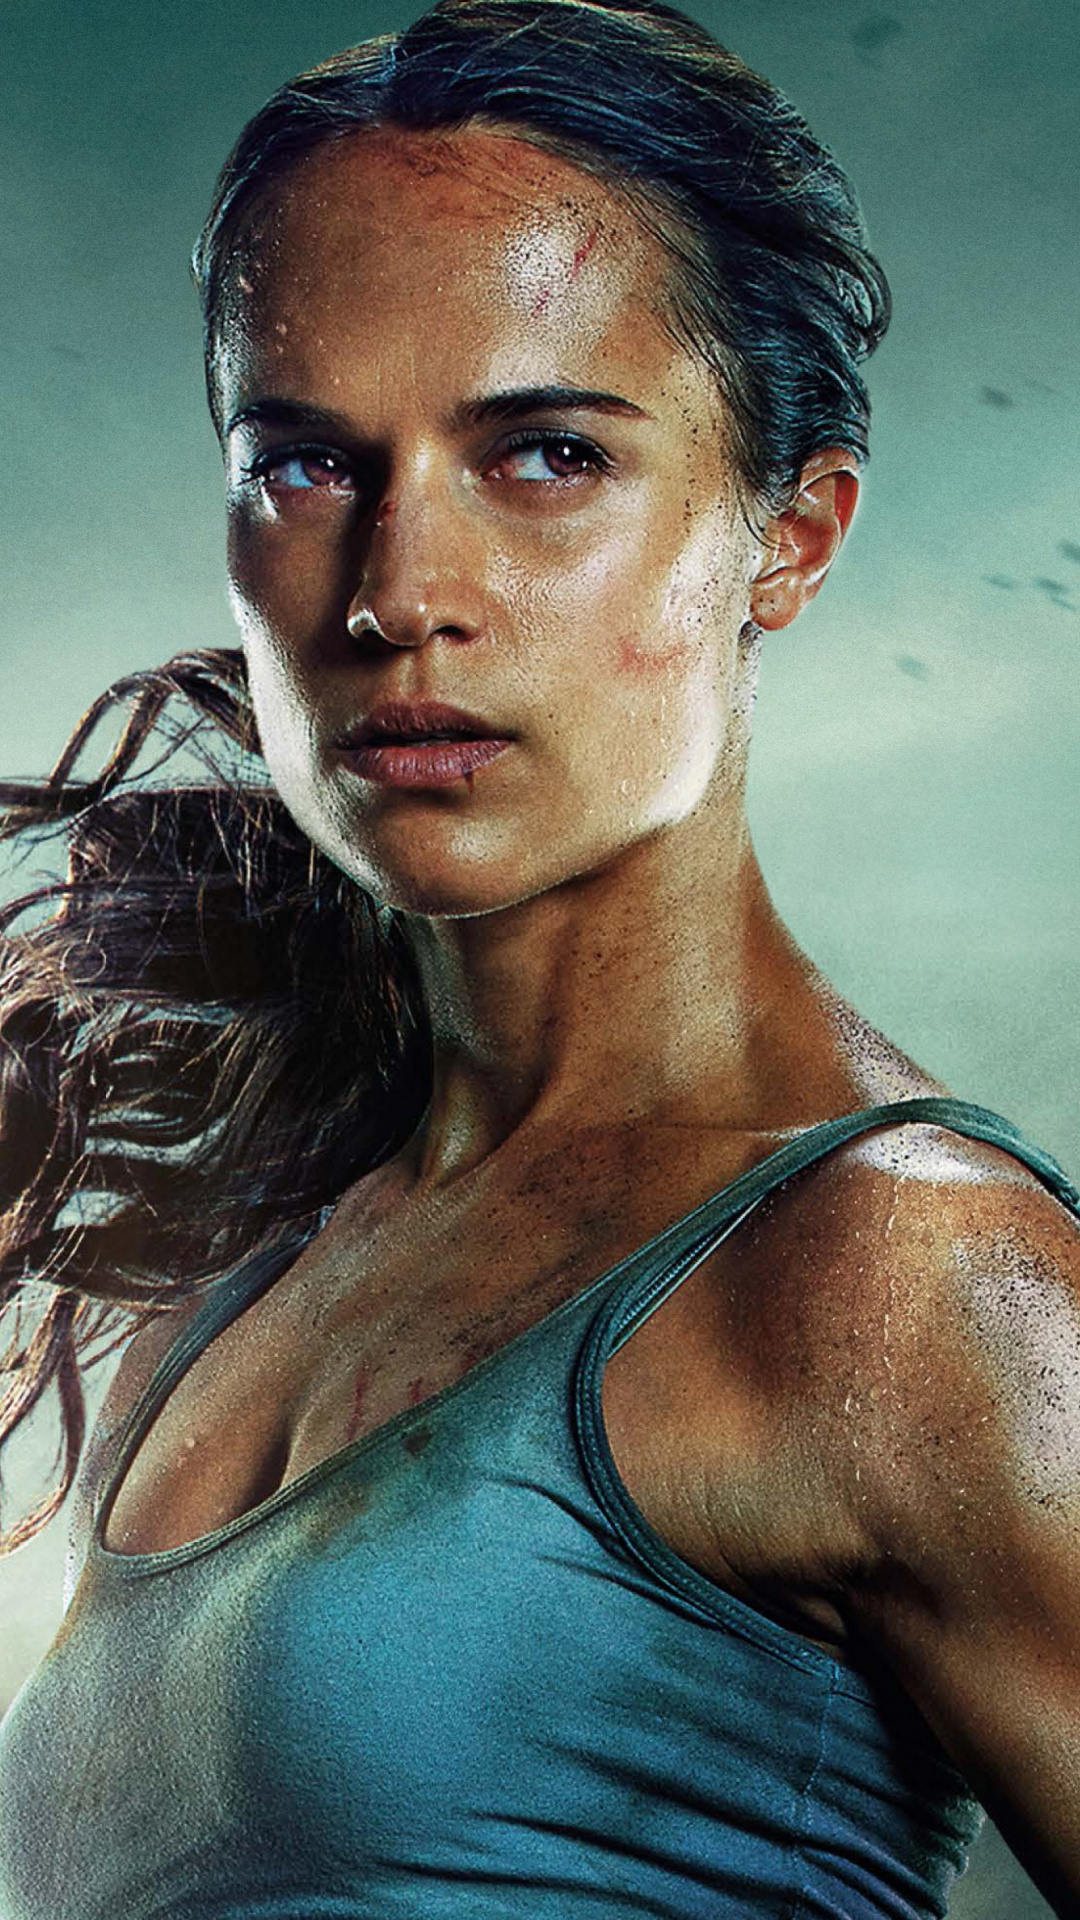 Lara Croft (Movie): Based on the 2013 video game of the same name. 1080x1920 Full HD Wallpaper.